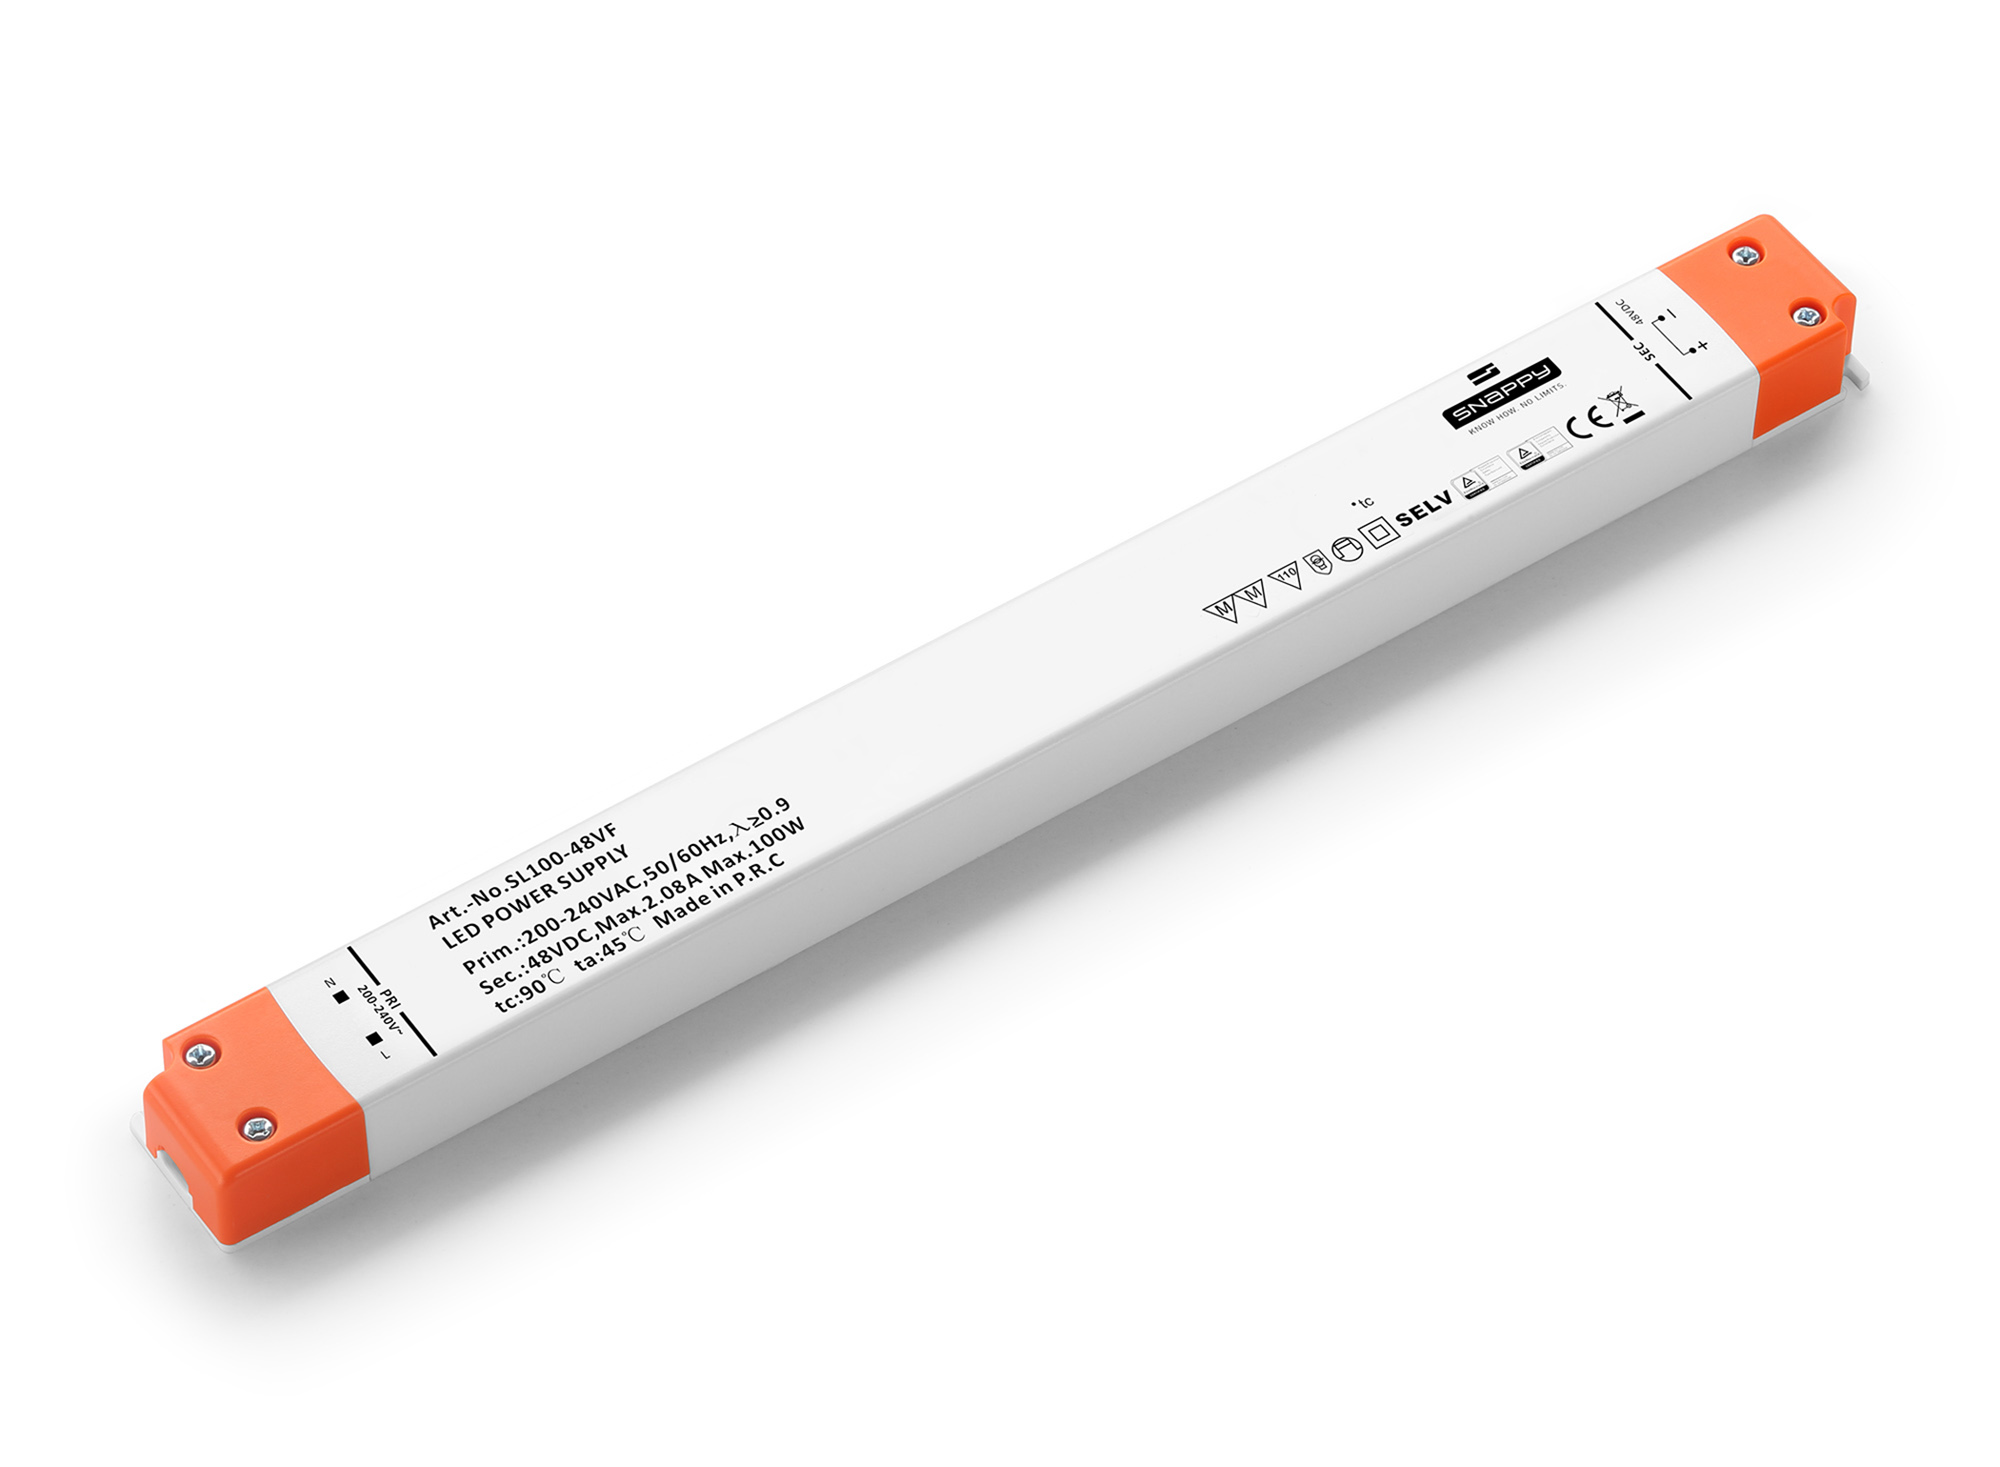 SL100-48VF  100W; Constant Voltage Non Dimmable LED Driver; 48VDC; 2.08A; Input 200-240VAC 50/60Hz; IP20.